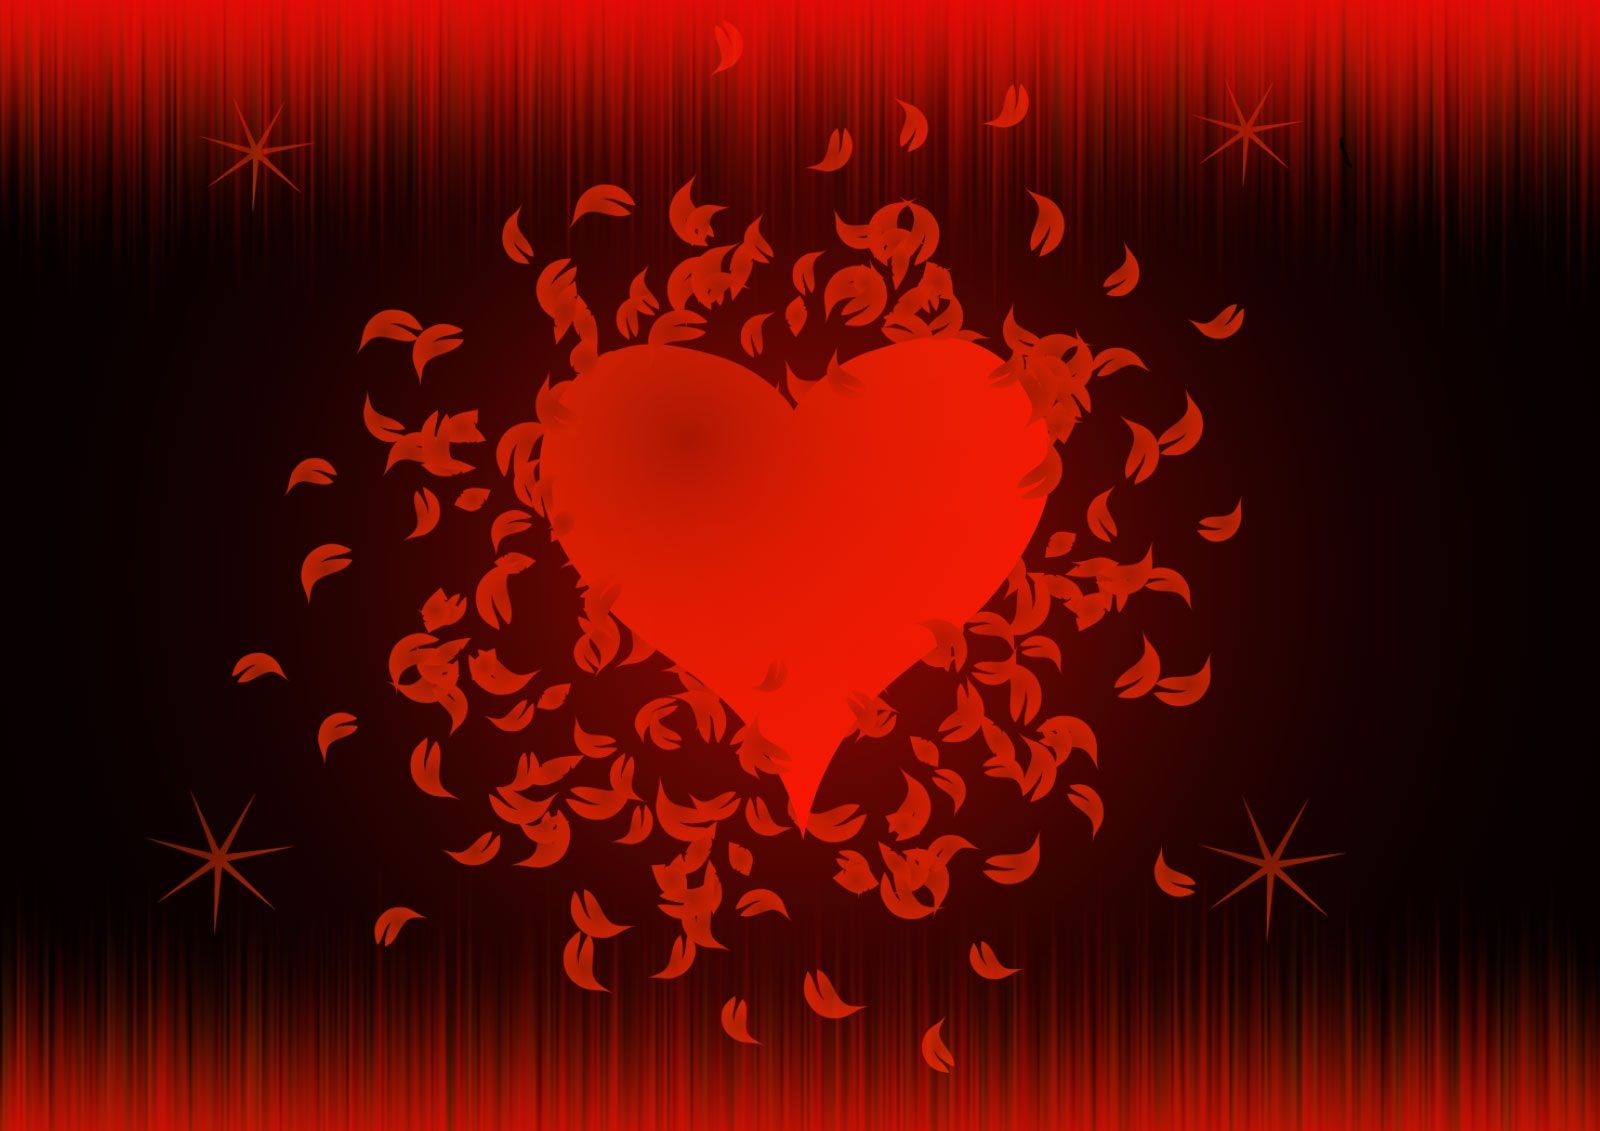 Animals Zoo Park: Valentines day Backgrounds, Valentines day ...